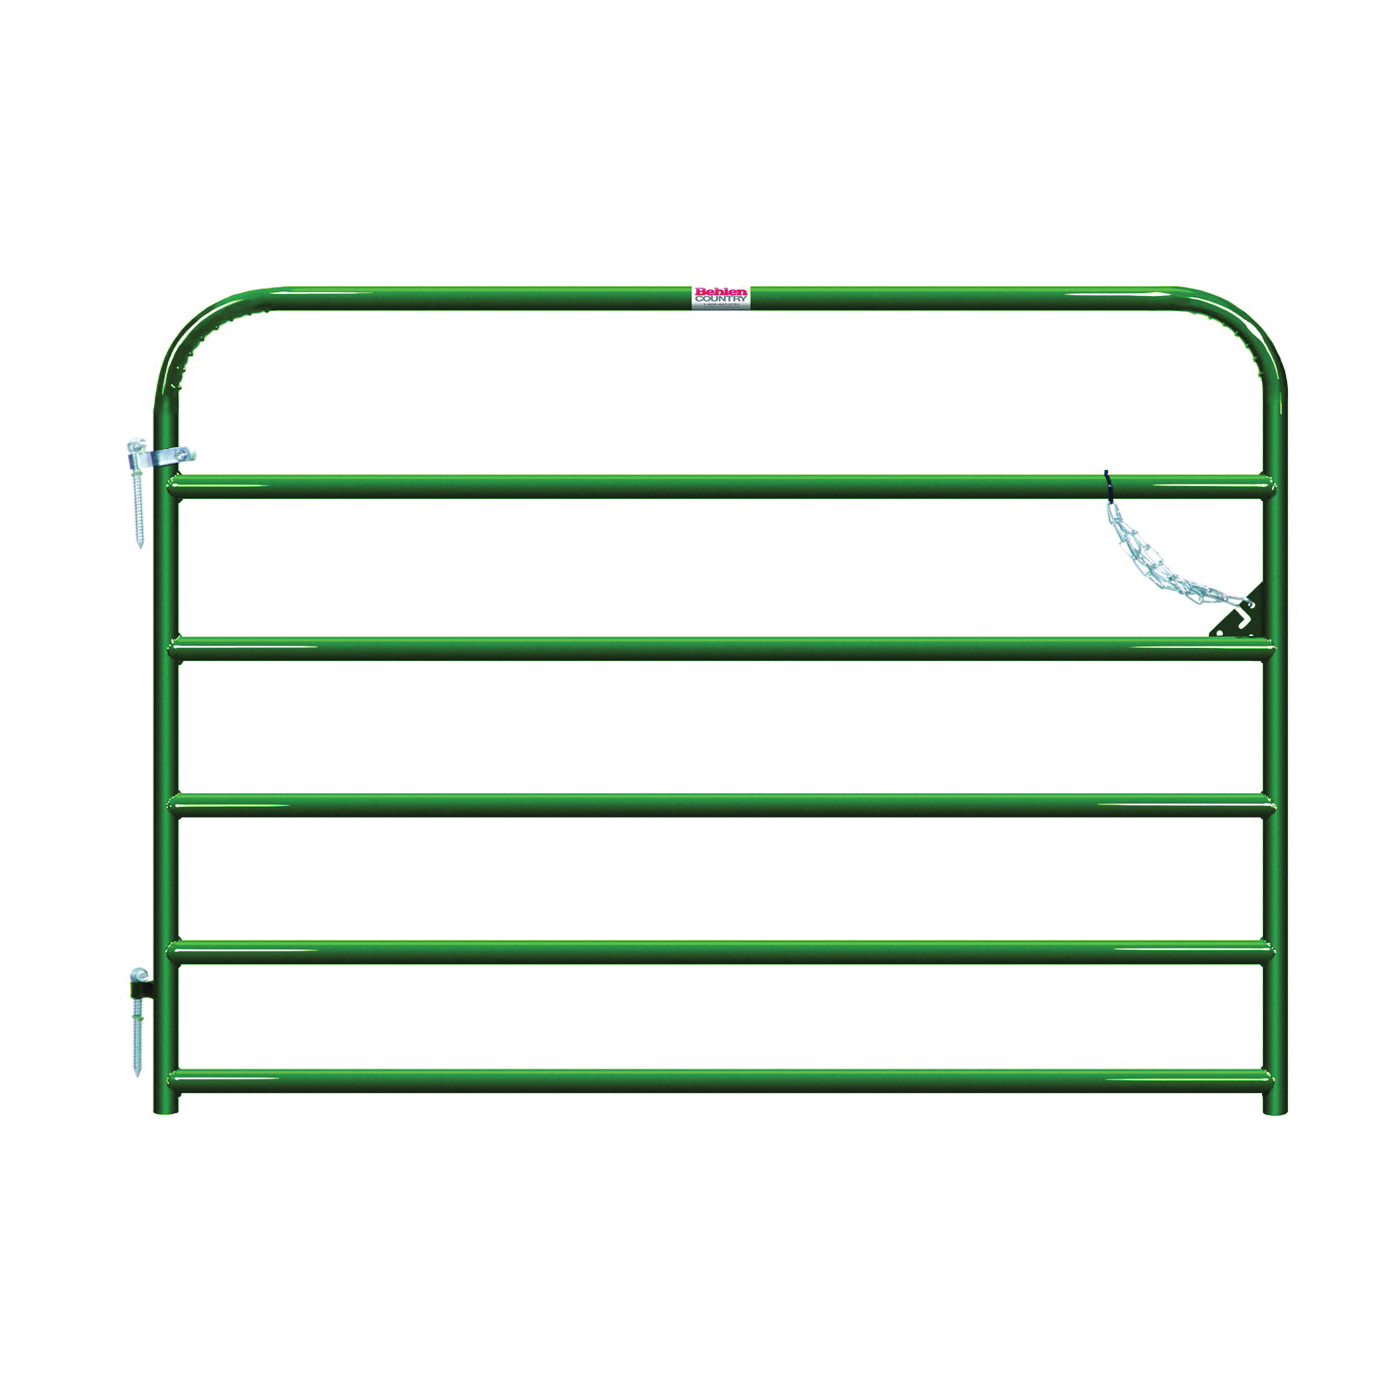 Behlen Country 40130062 Utility Gate, 6 ft W Gate, 50 in H Gate, 20 ga Frame Tube/Channel, Green